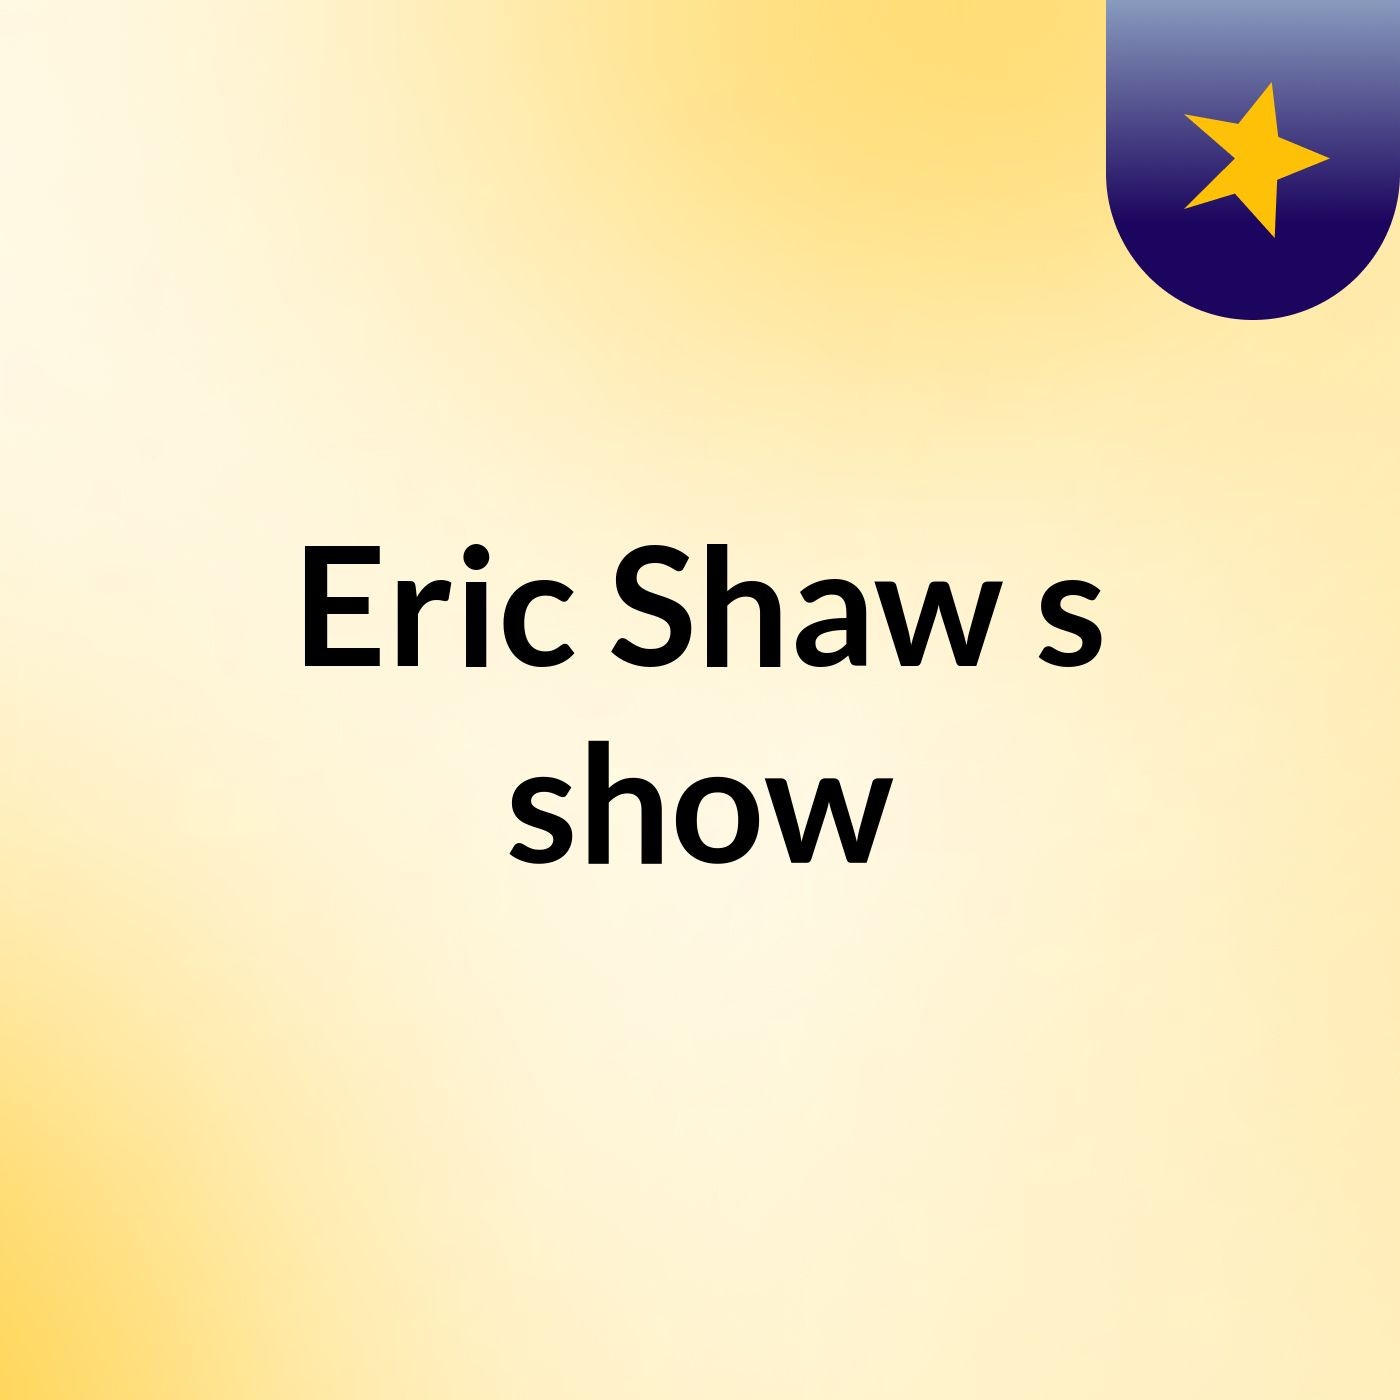 Eric Shaw's show